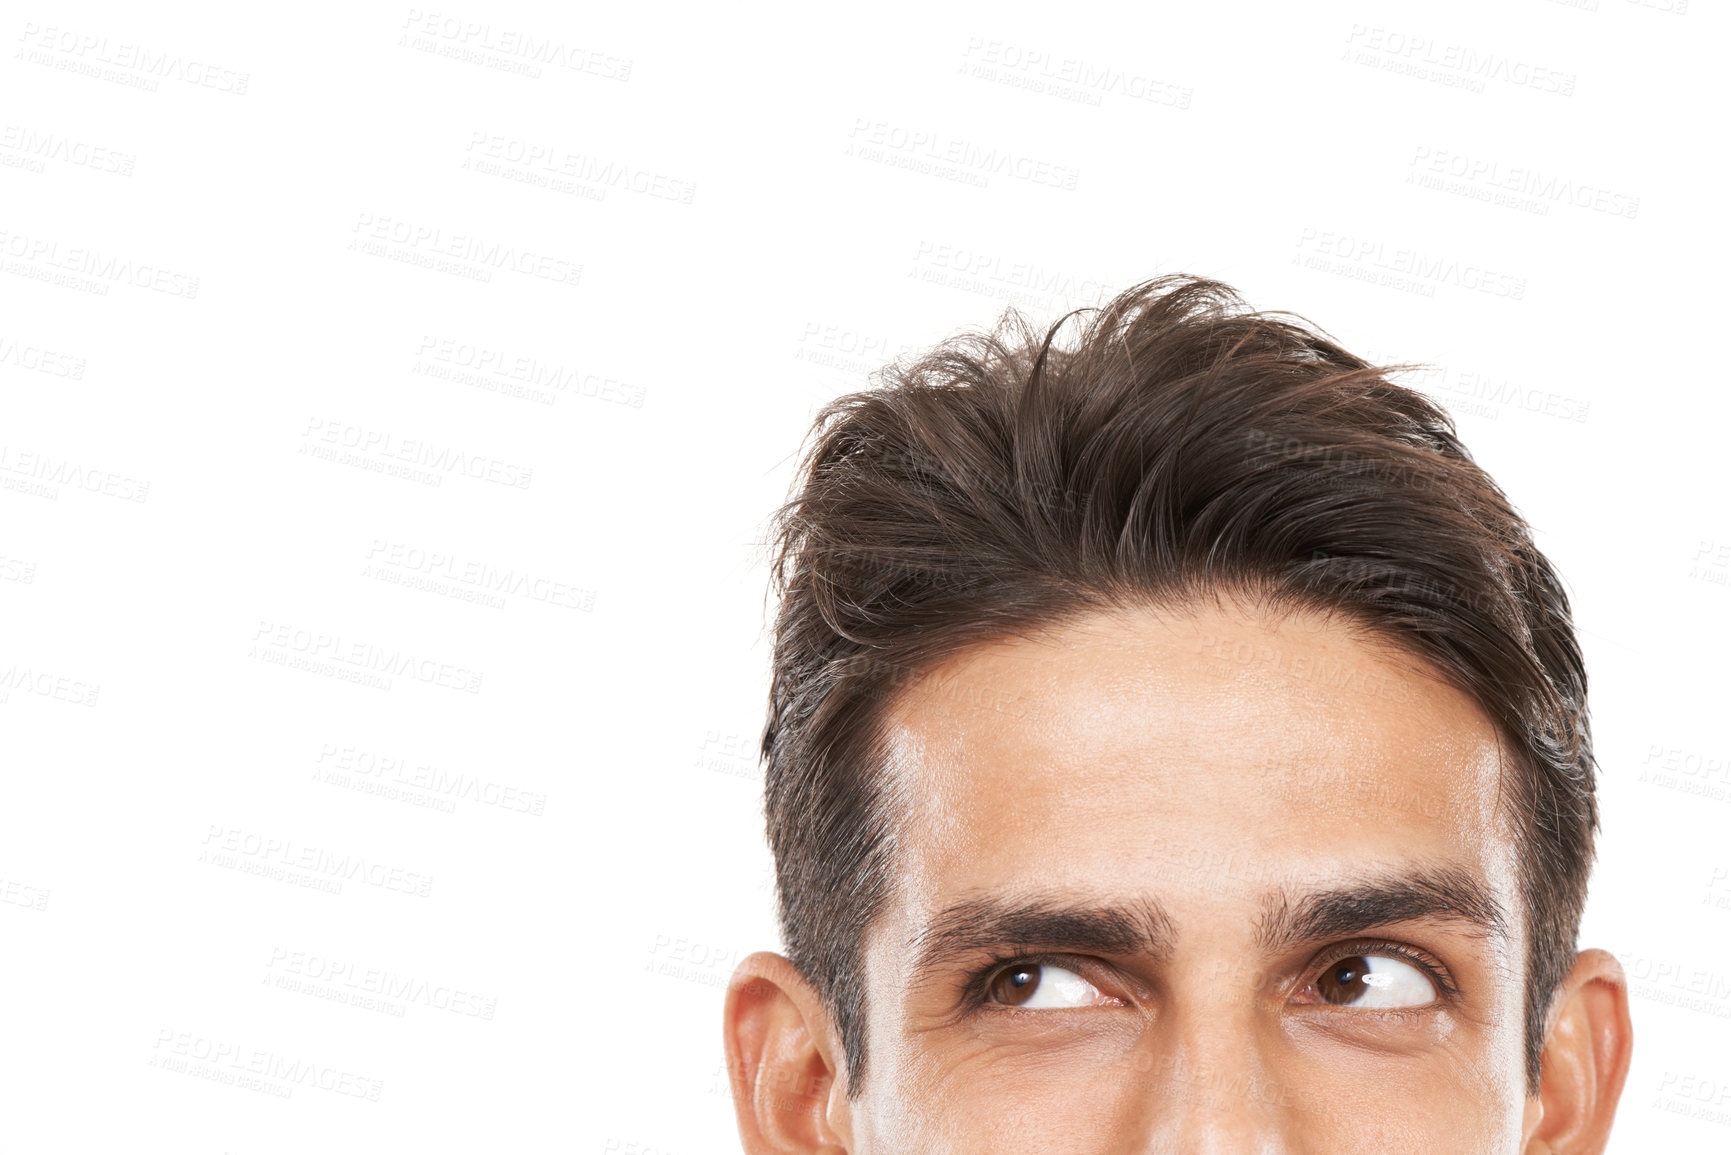 Buy stock photo Cropped shot of a young man's face looking sideways towards copyspace